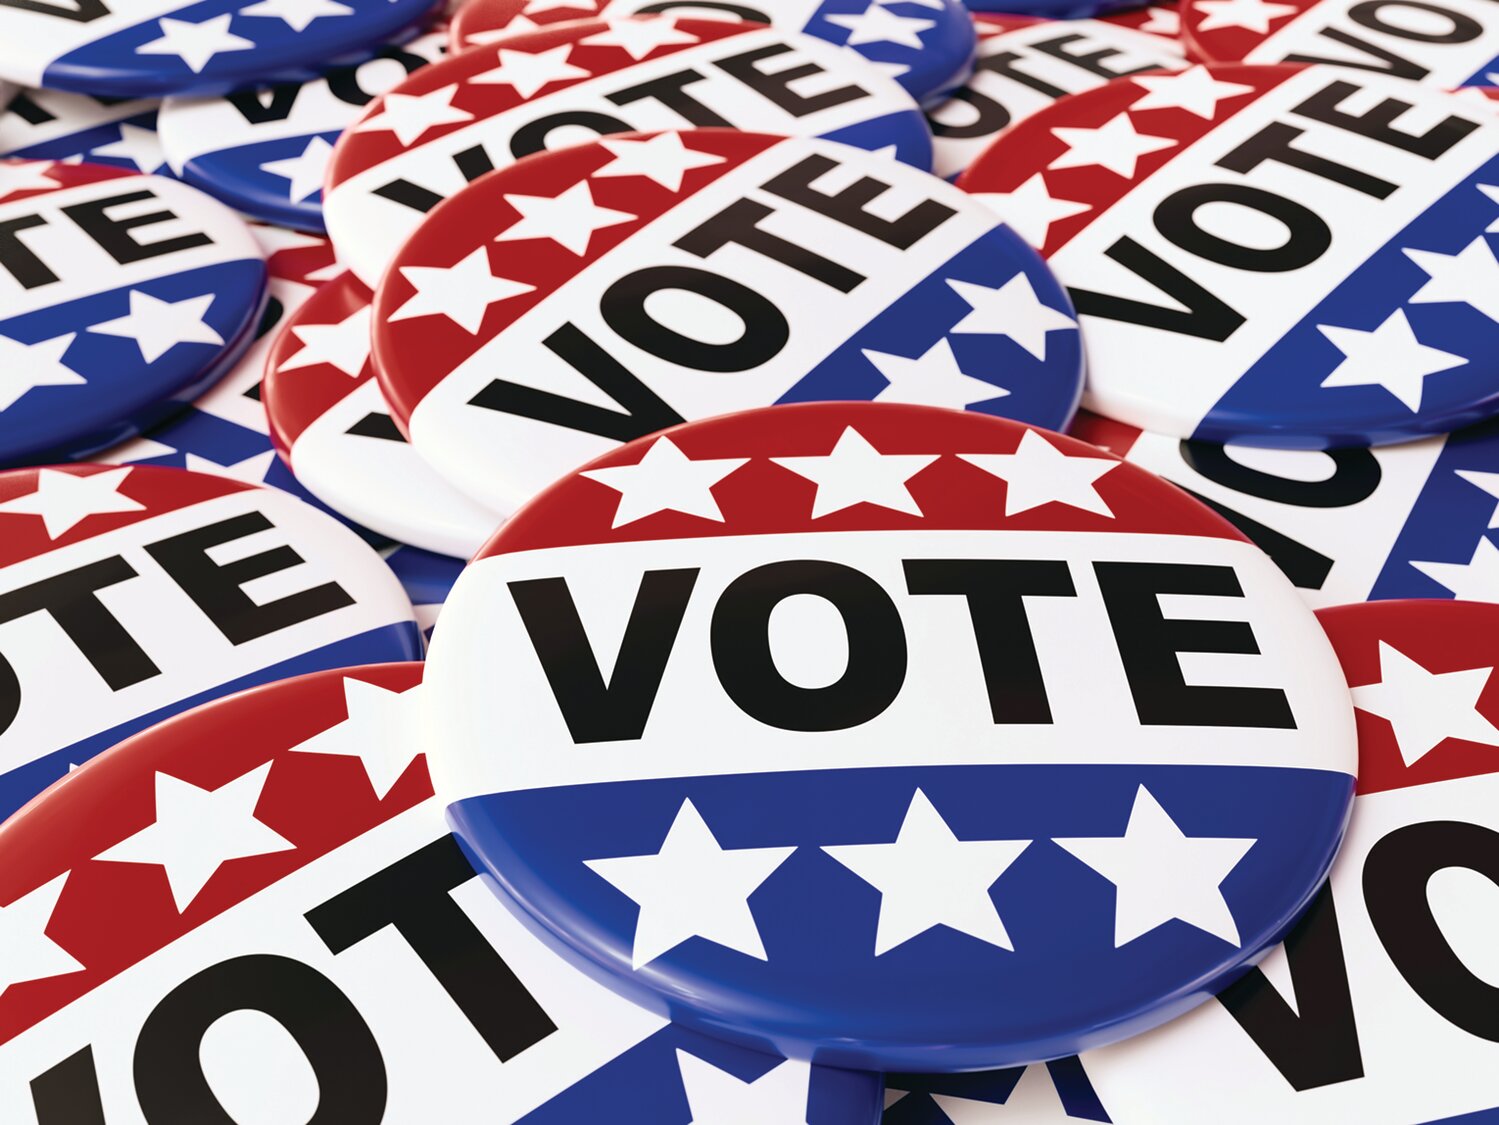 The 3rd Congressional District's special election is right around the corner. Find out what you need to know to vote.